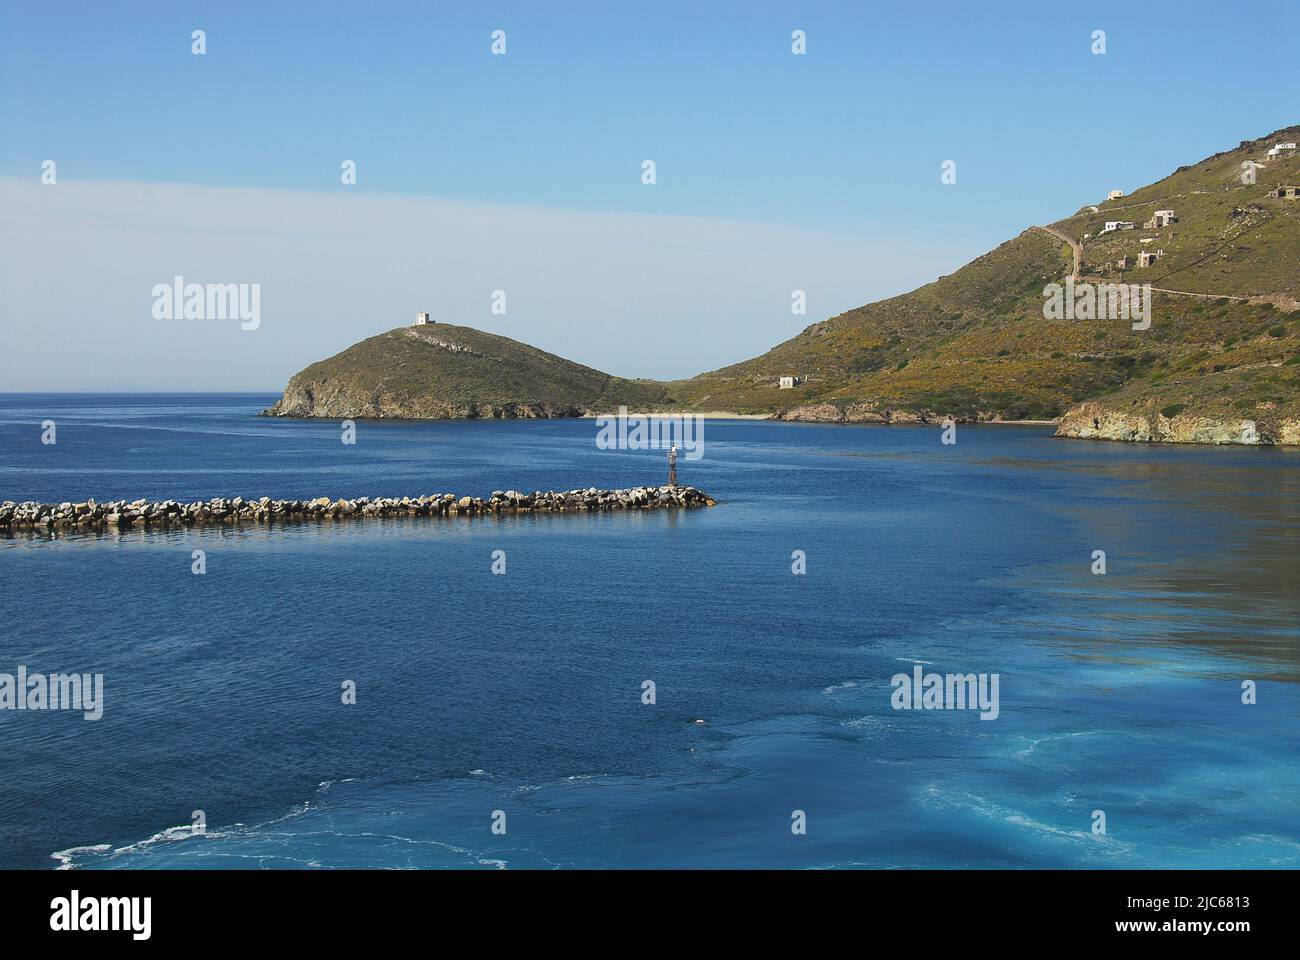 A beautiful panoramic view of the port and jetty of Mykonos, Greece from an arriving ferry. Stock Photo